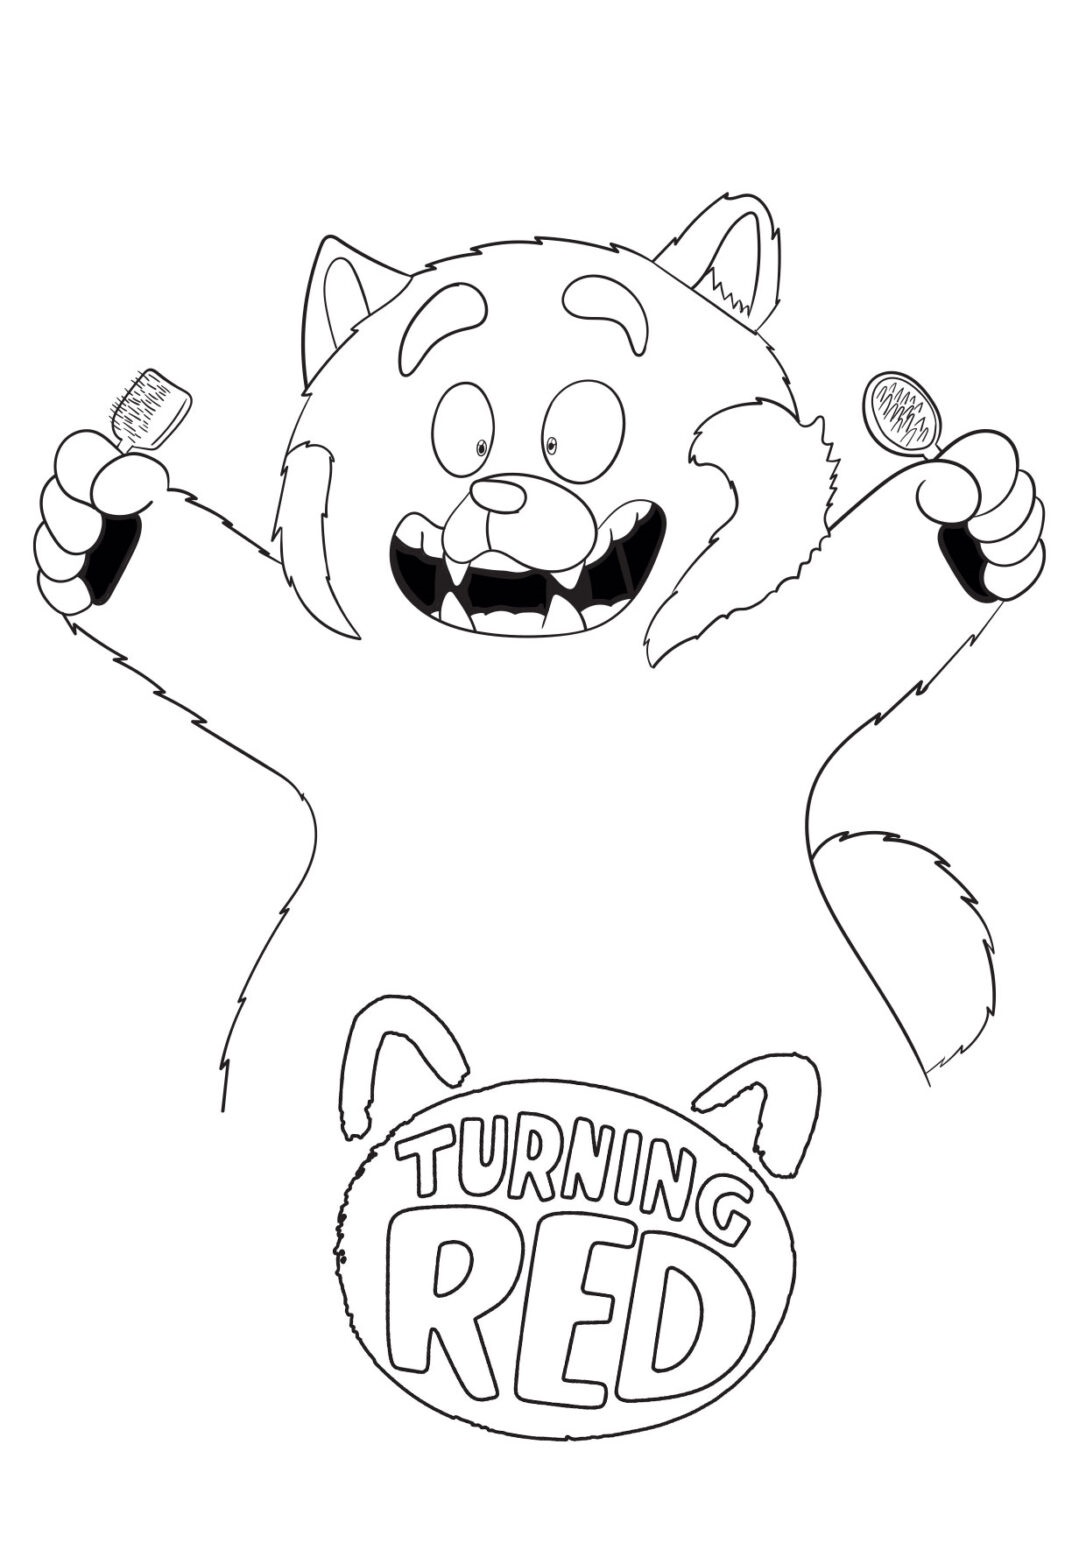 Turning Red Coloring Pages - Mei Lee panda Turning Red Coloring Pages